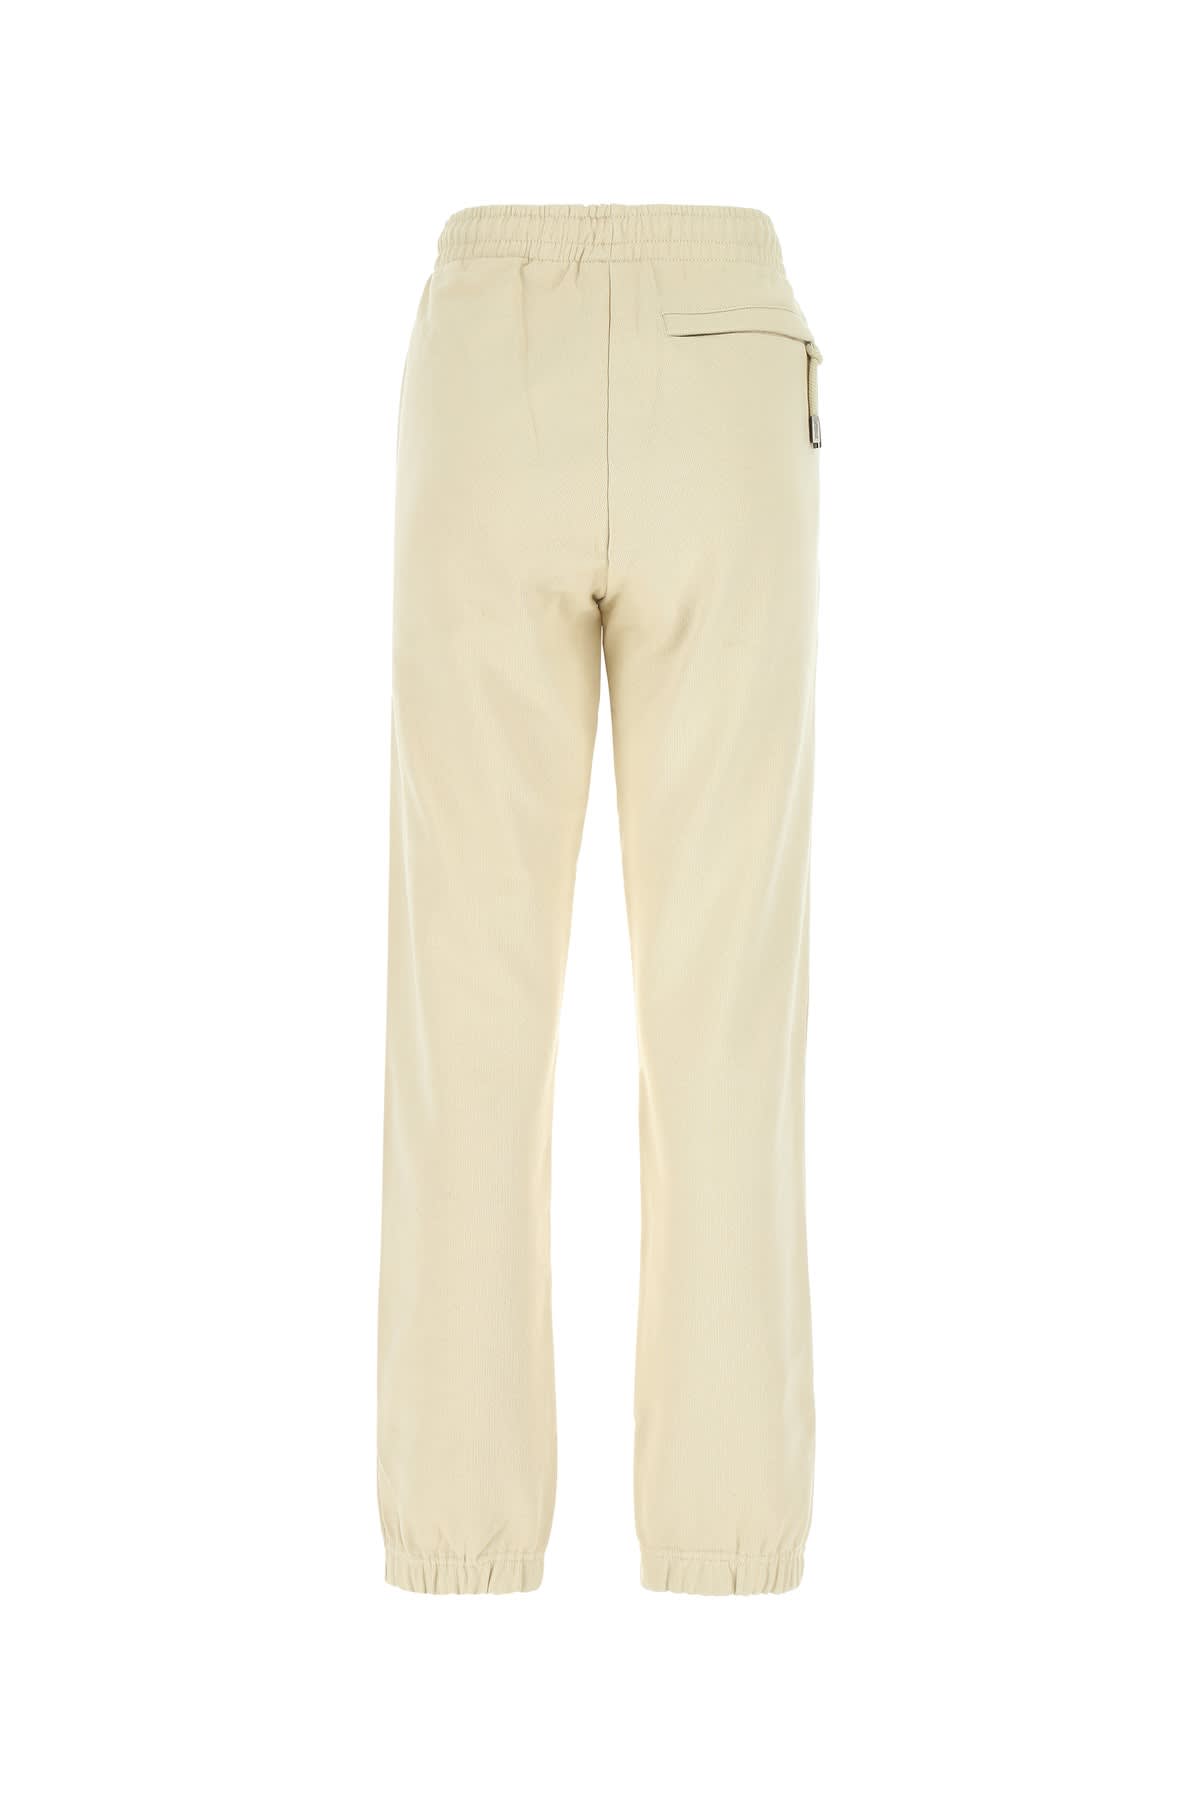 Jacquemus Sand Cotton Joggers In 130